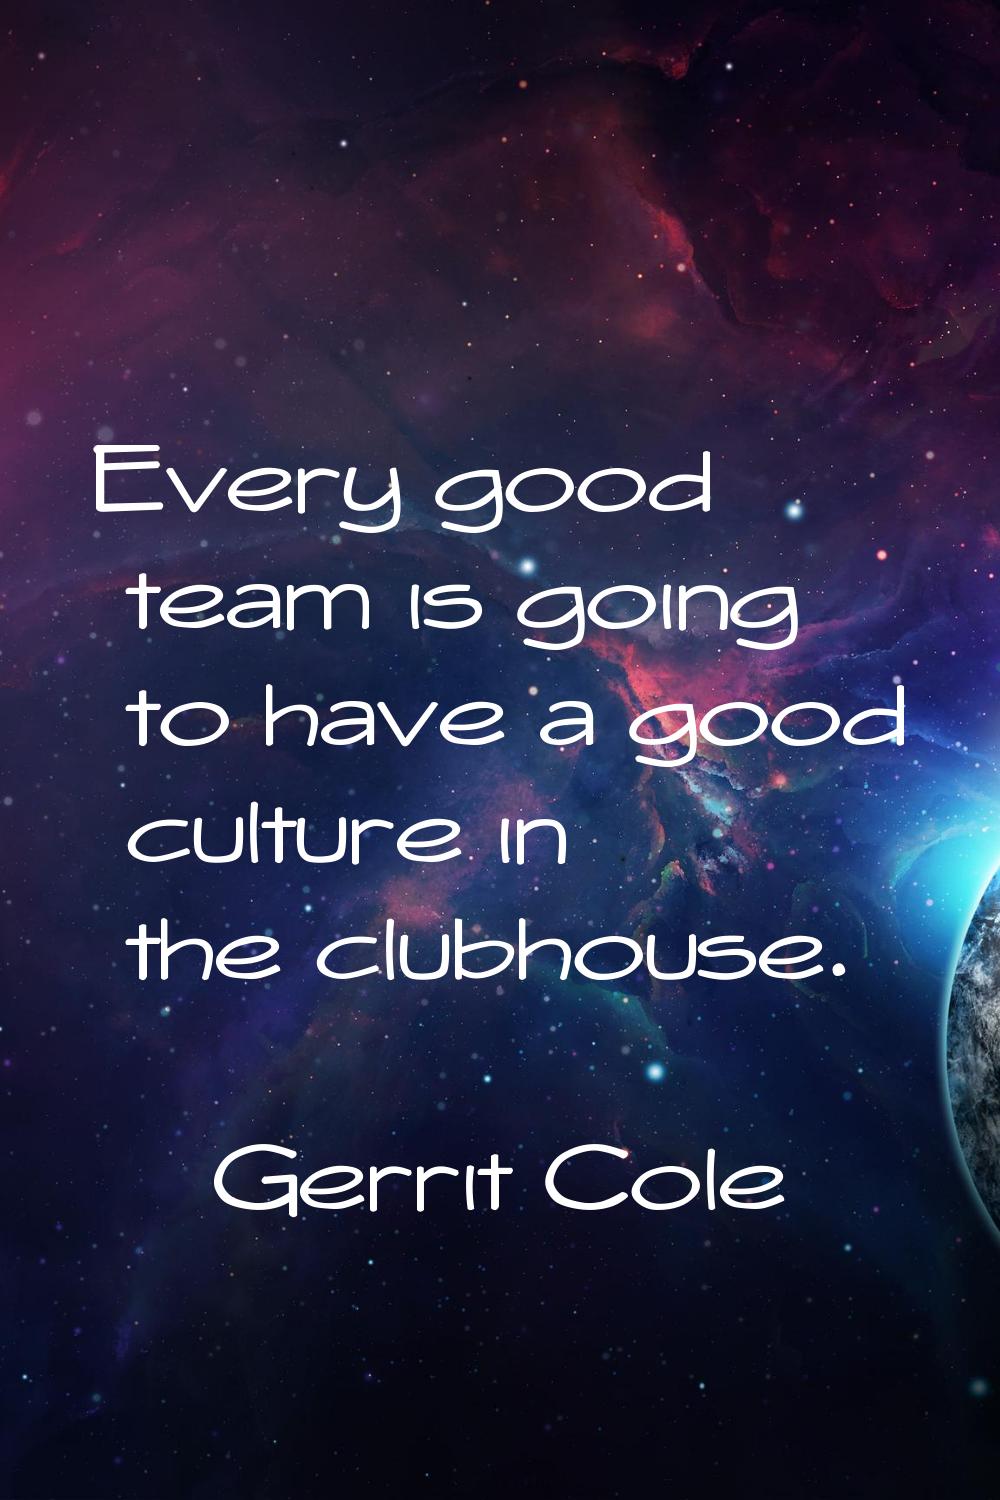 Every good team is going to have a good culture in the clubhouse.